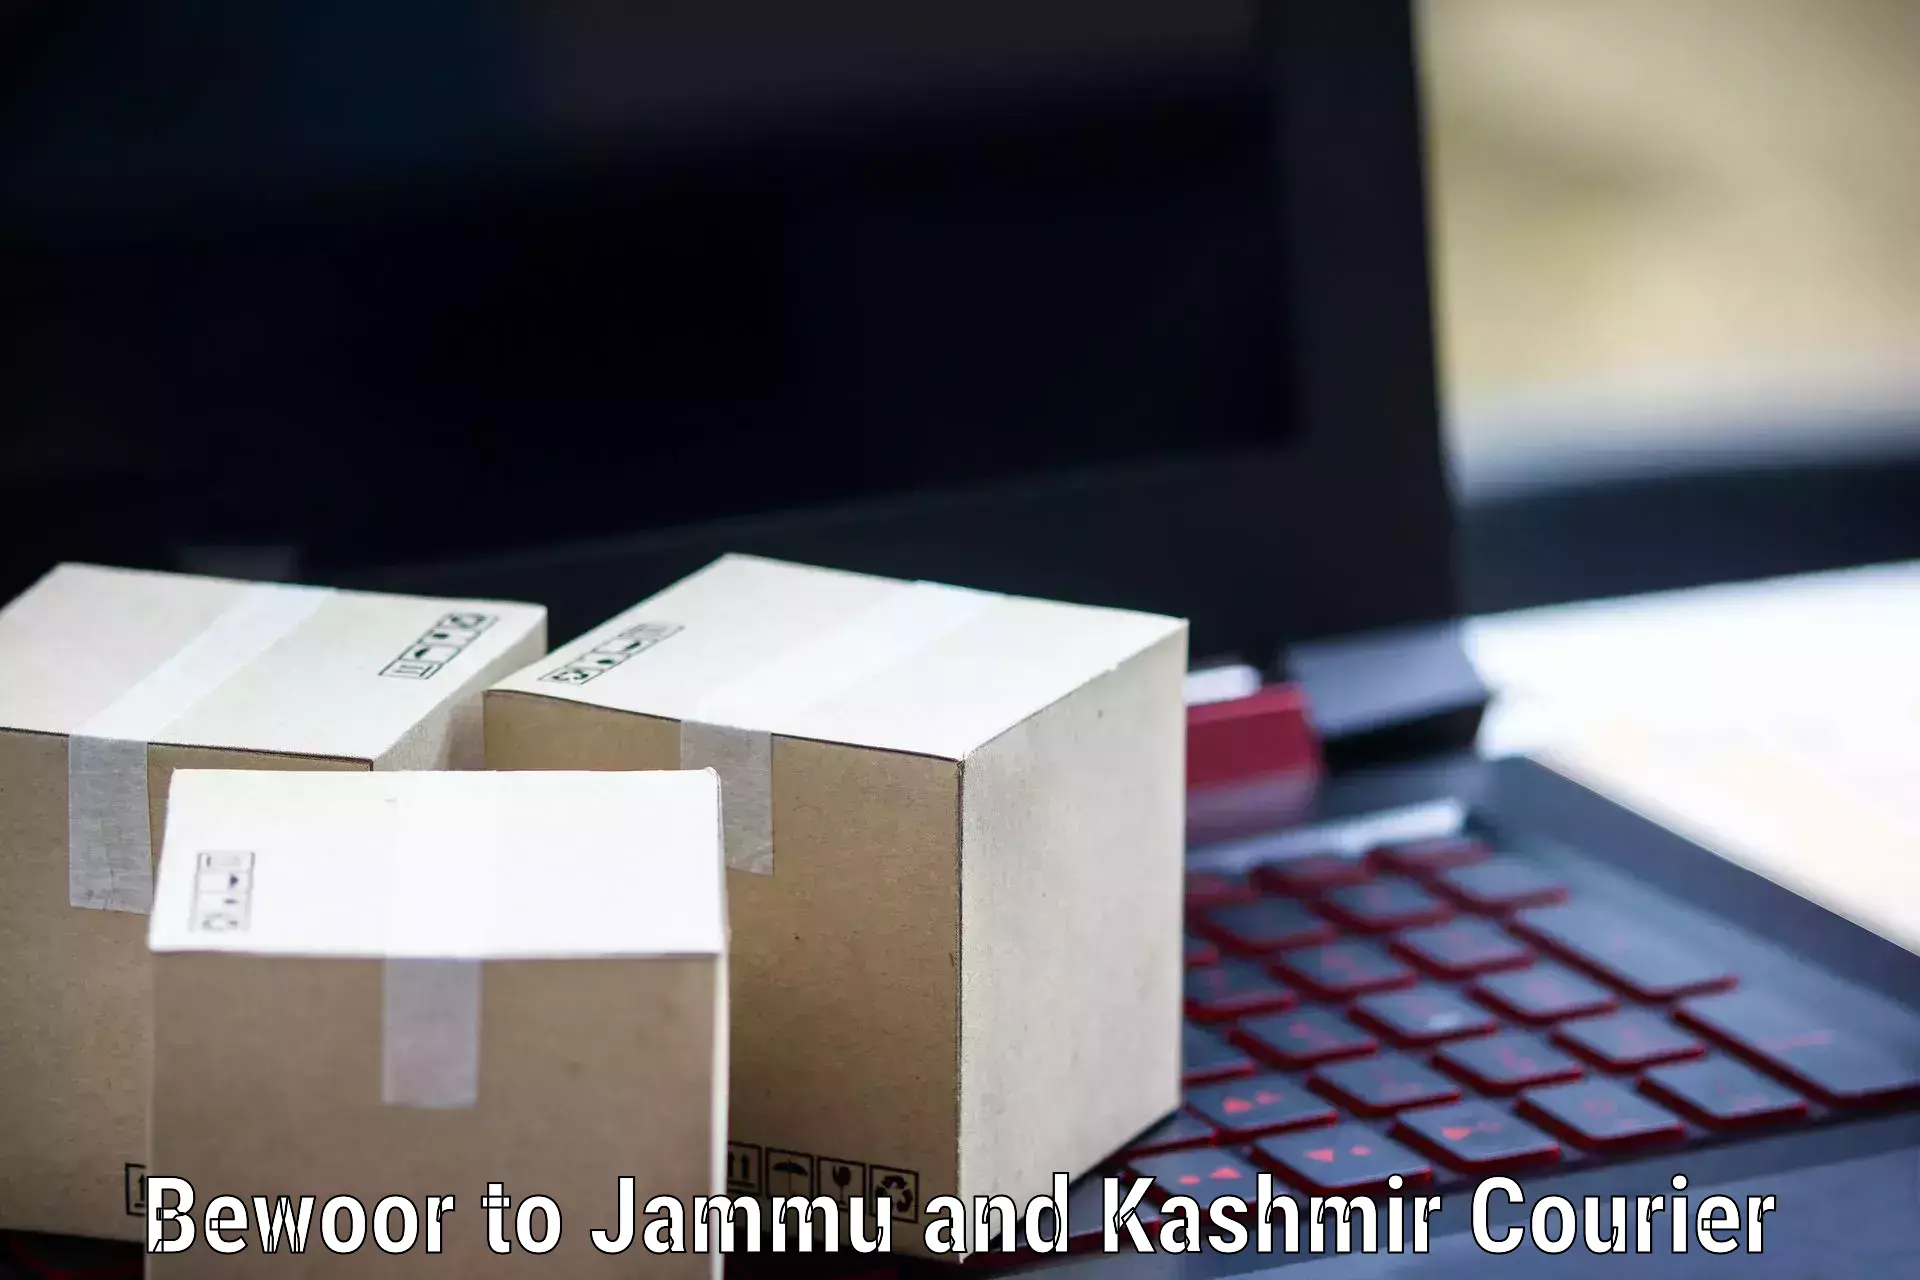 Pharmaceutical courier Bewoor to Budgam